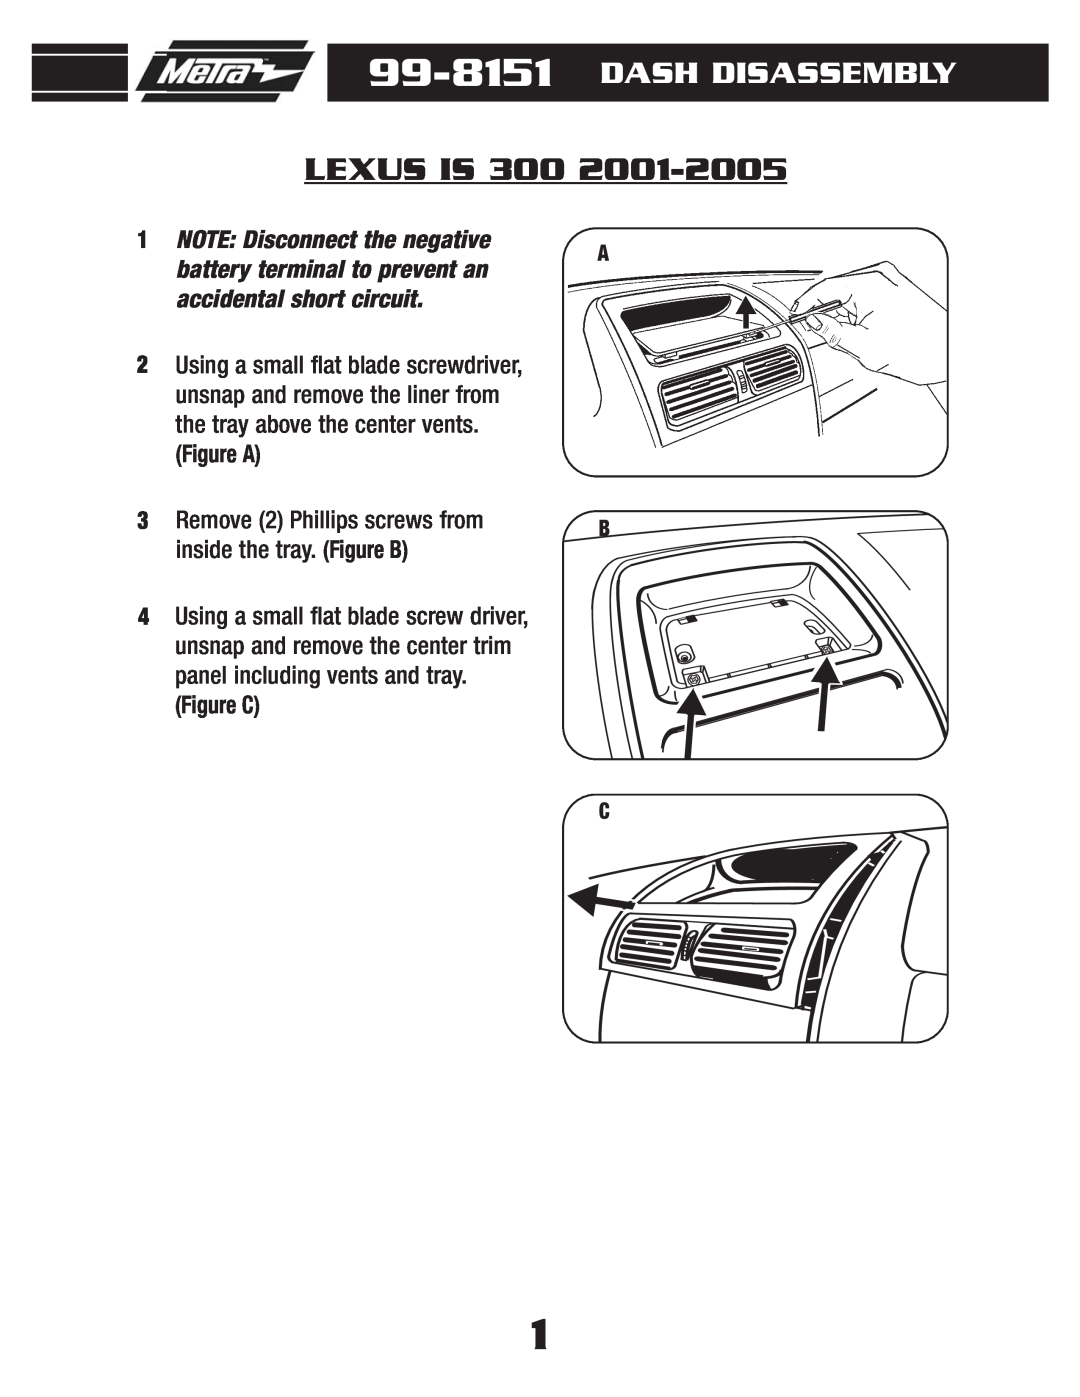 Metra Electronics 99-8151 installation instructions Lexus Is, Dash Disassembly, Figure A, Figure C 